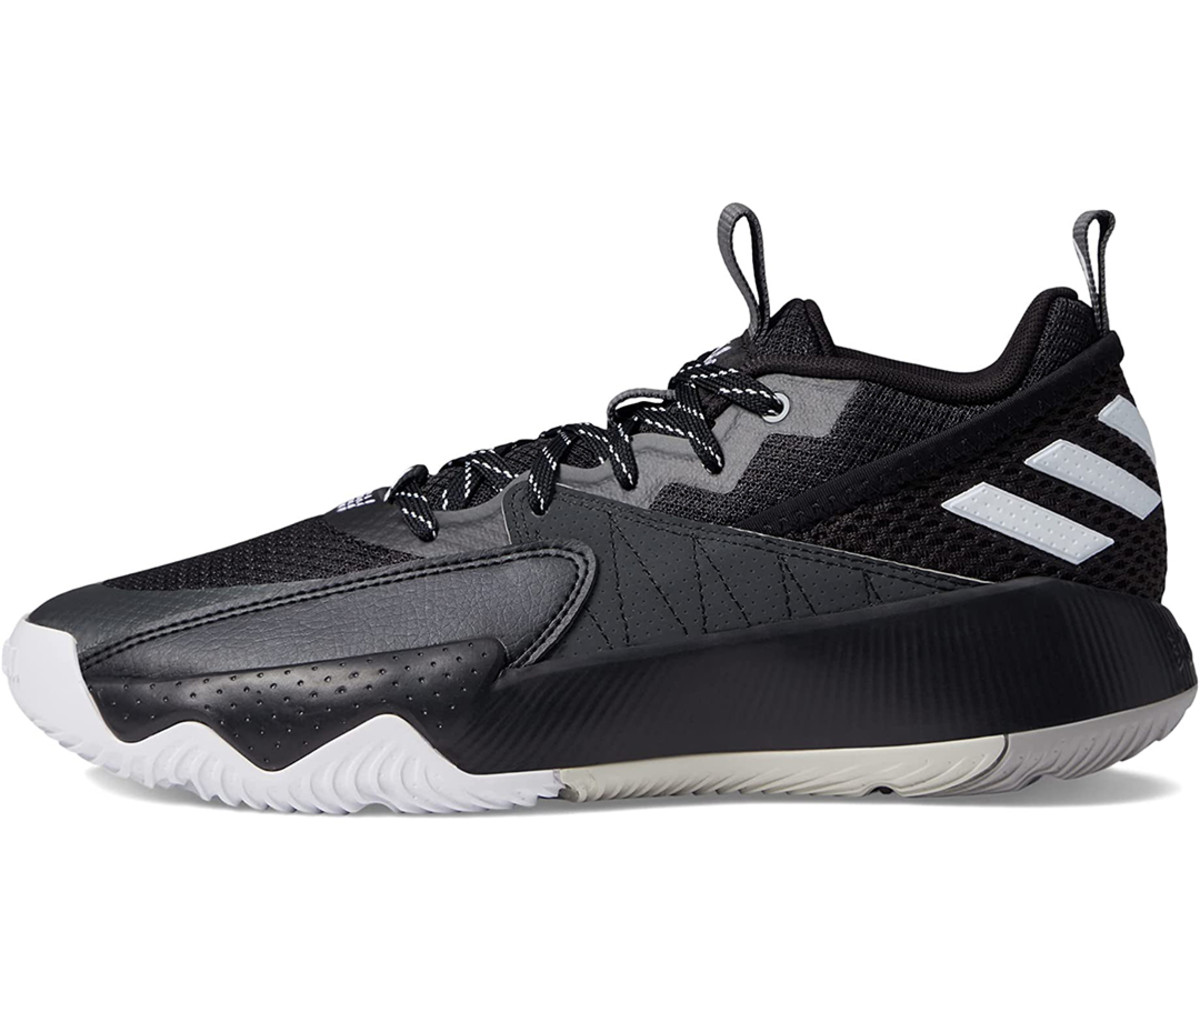 Workout on the Courts in These adidas Basketball Shoes - Men's Journal